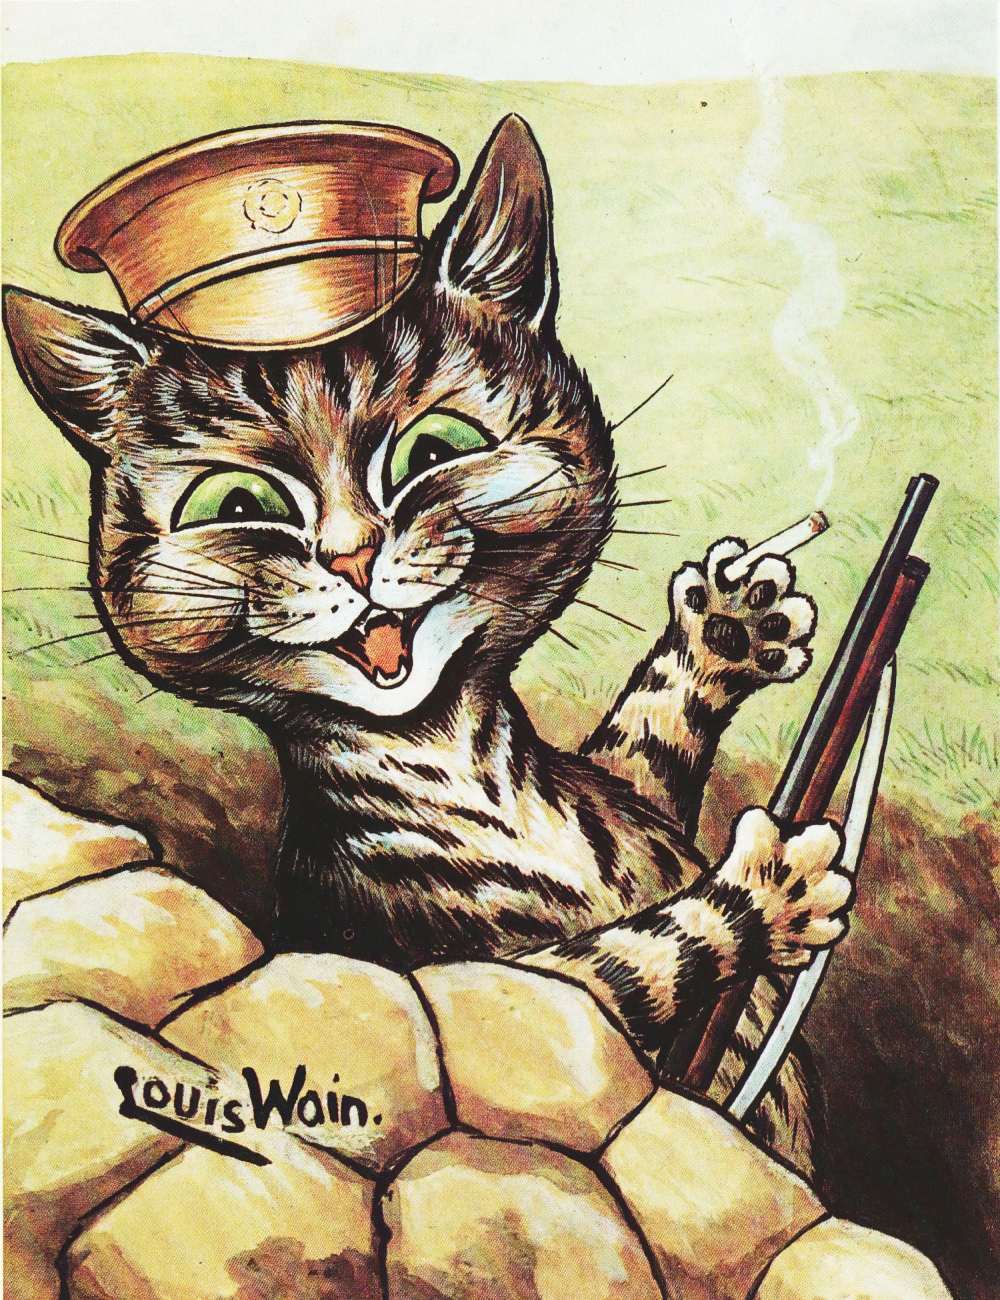 One of Wain's illustrations relating to world war one, depicting a soldier cat on the lines.